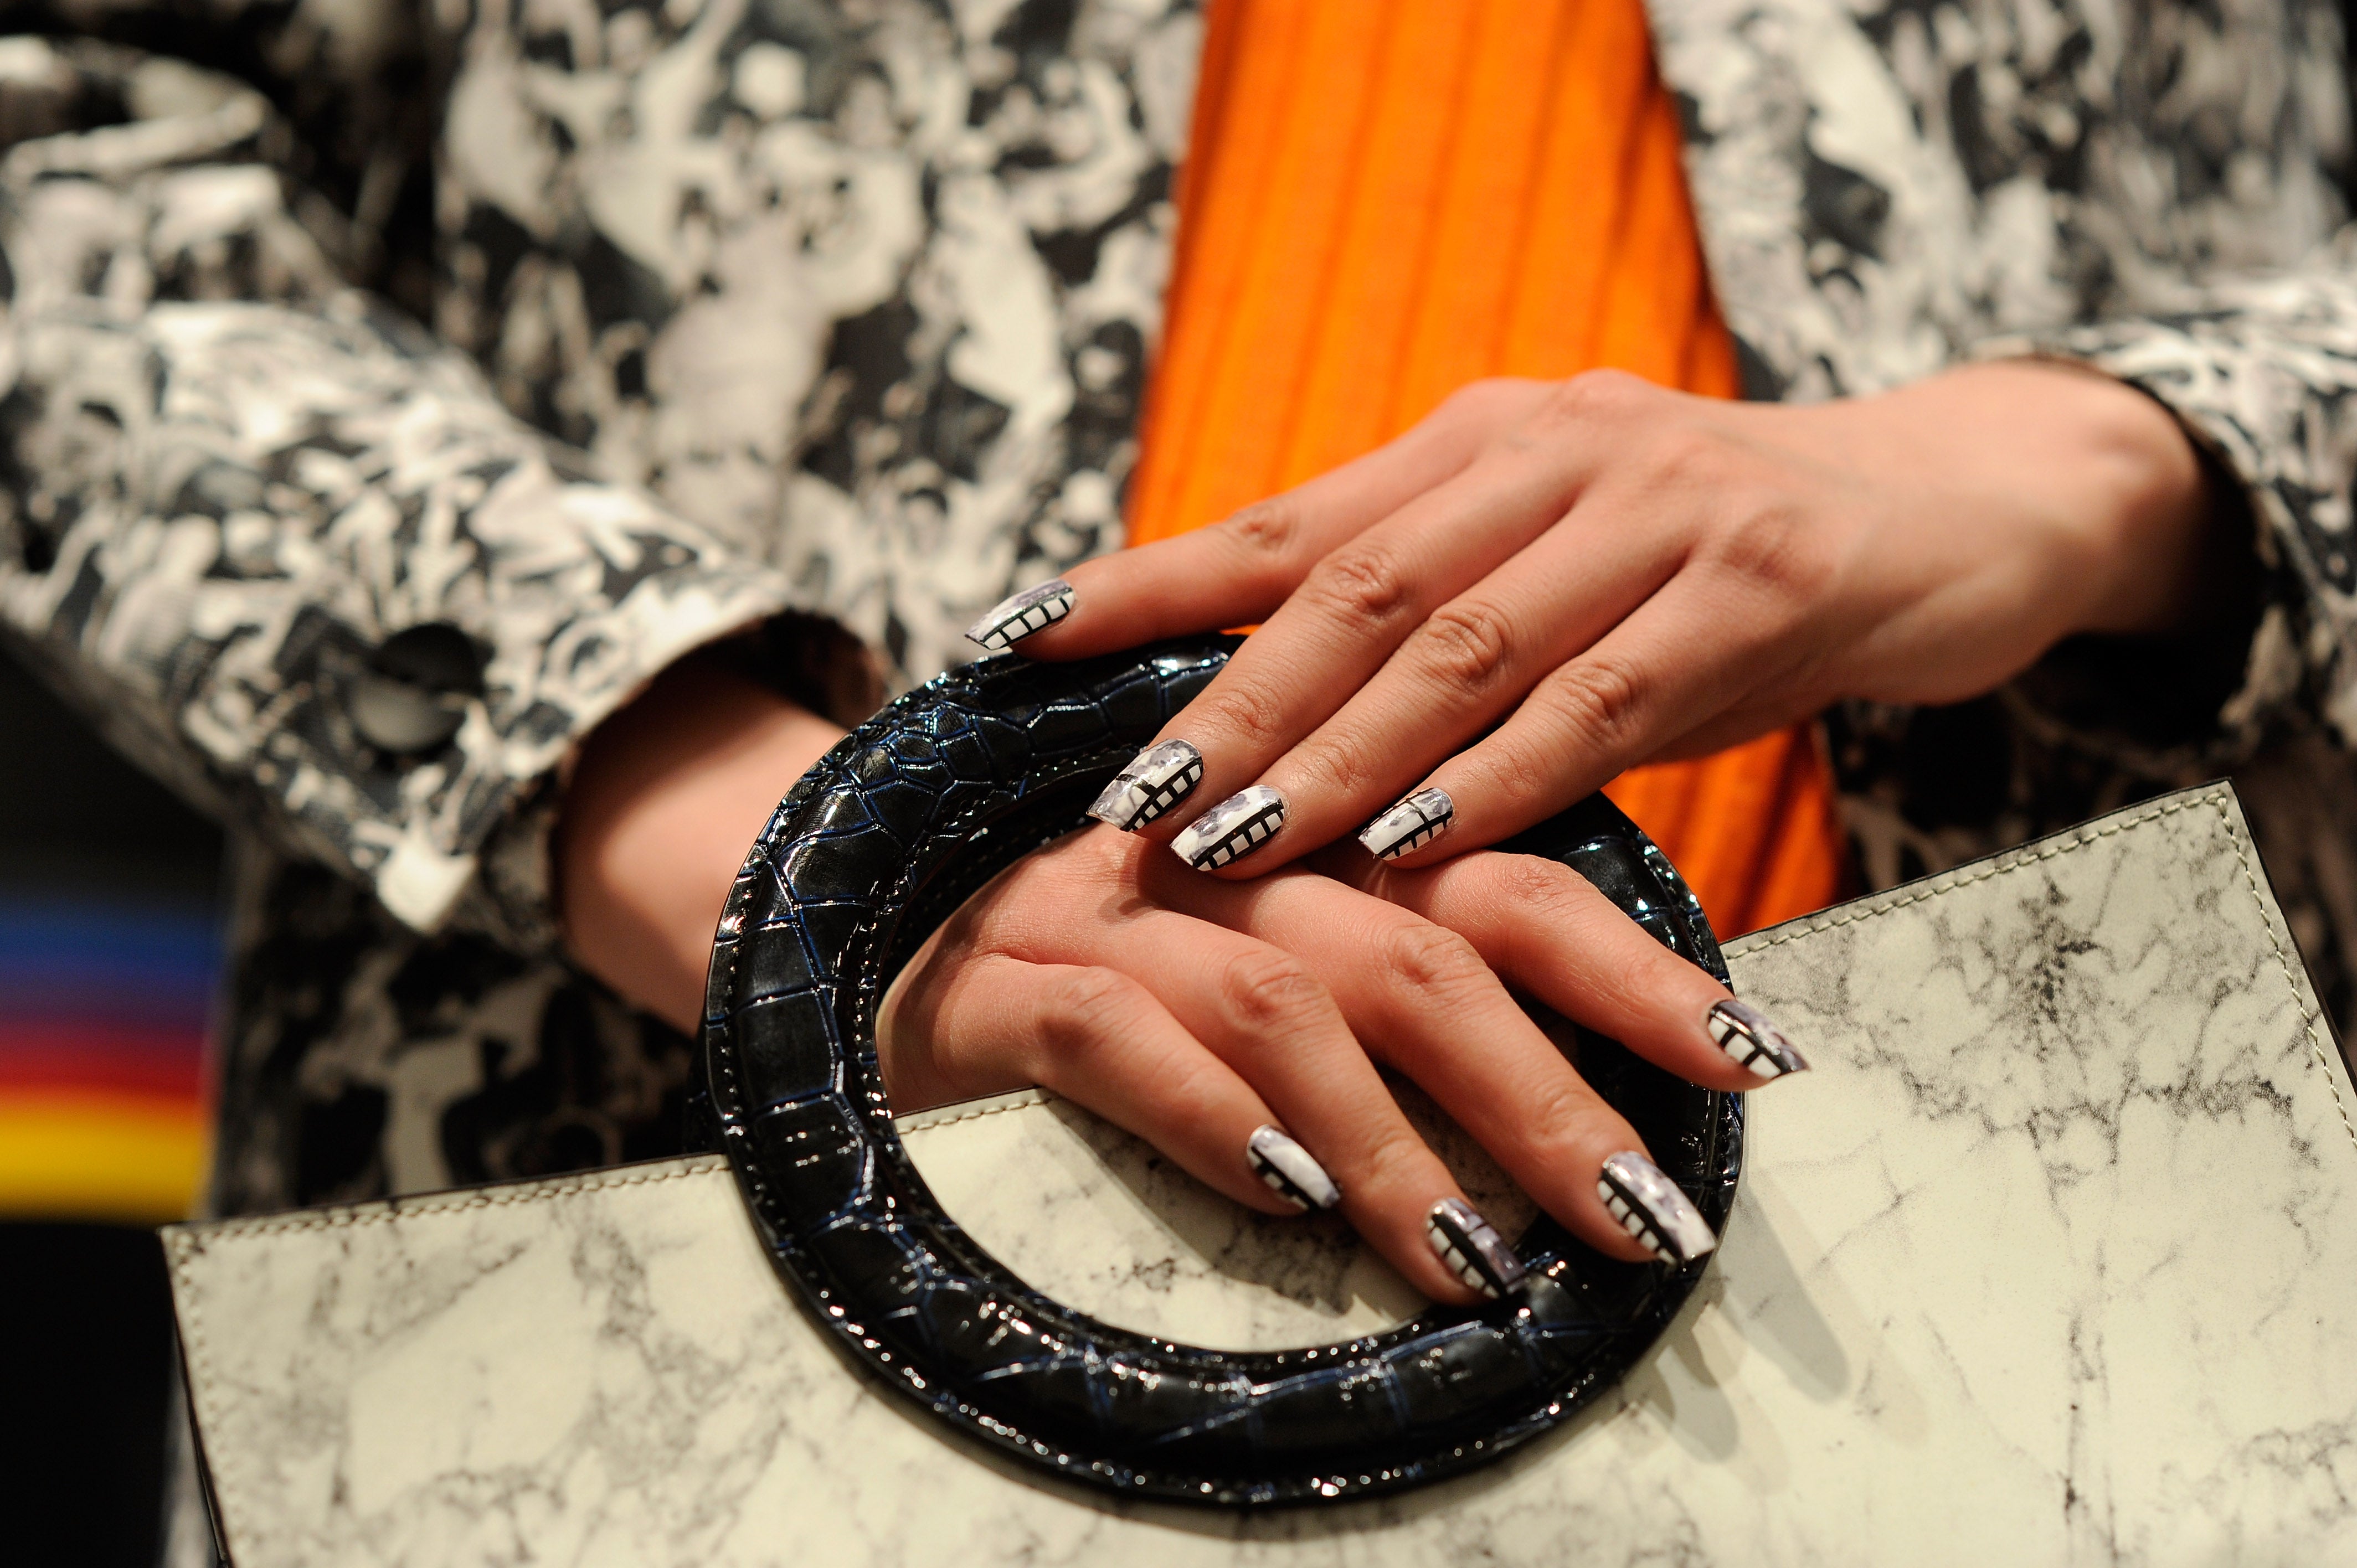 13 Nail Looks You Need to Try This Fall